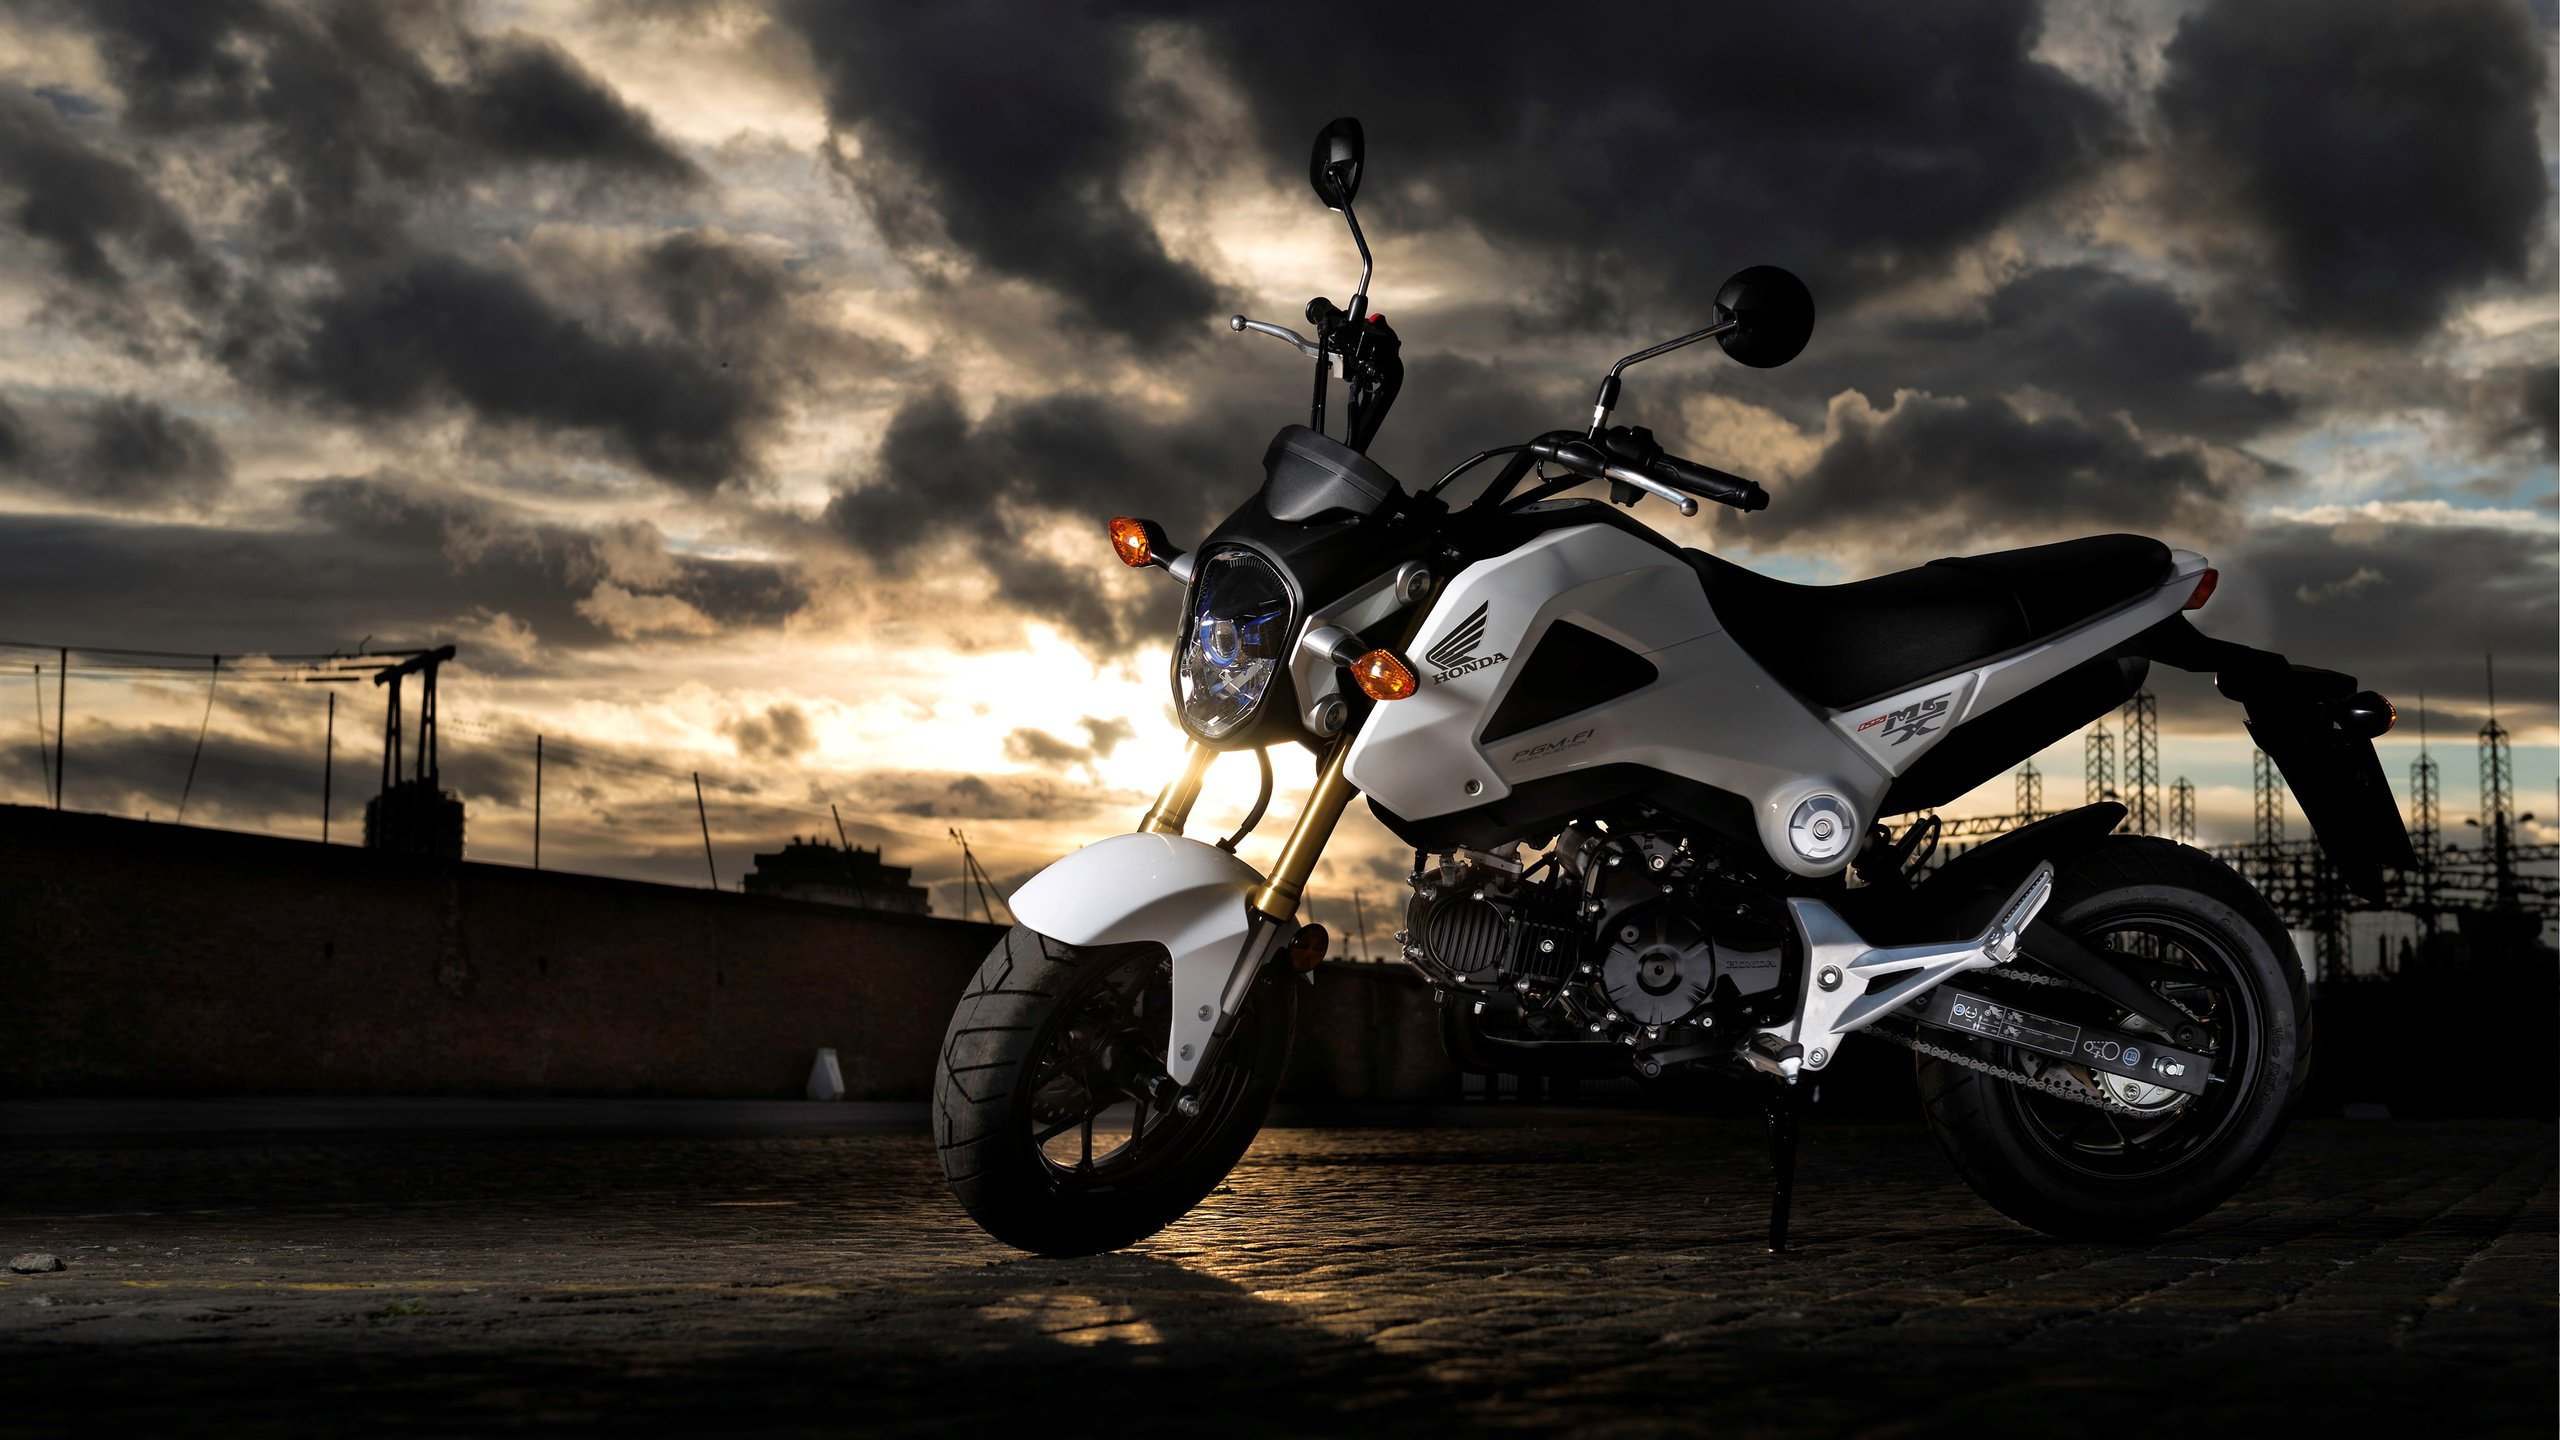 Black and White Sports Bike on Road During Daytime. Wallpaper in 2560x1440 Resolution